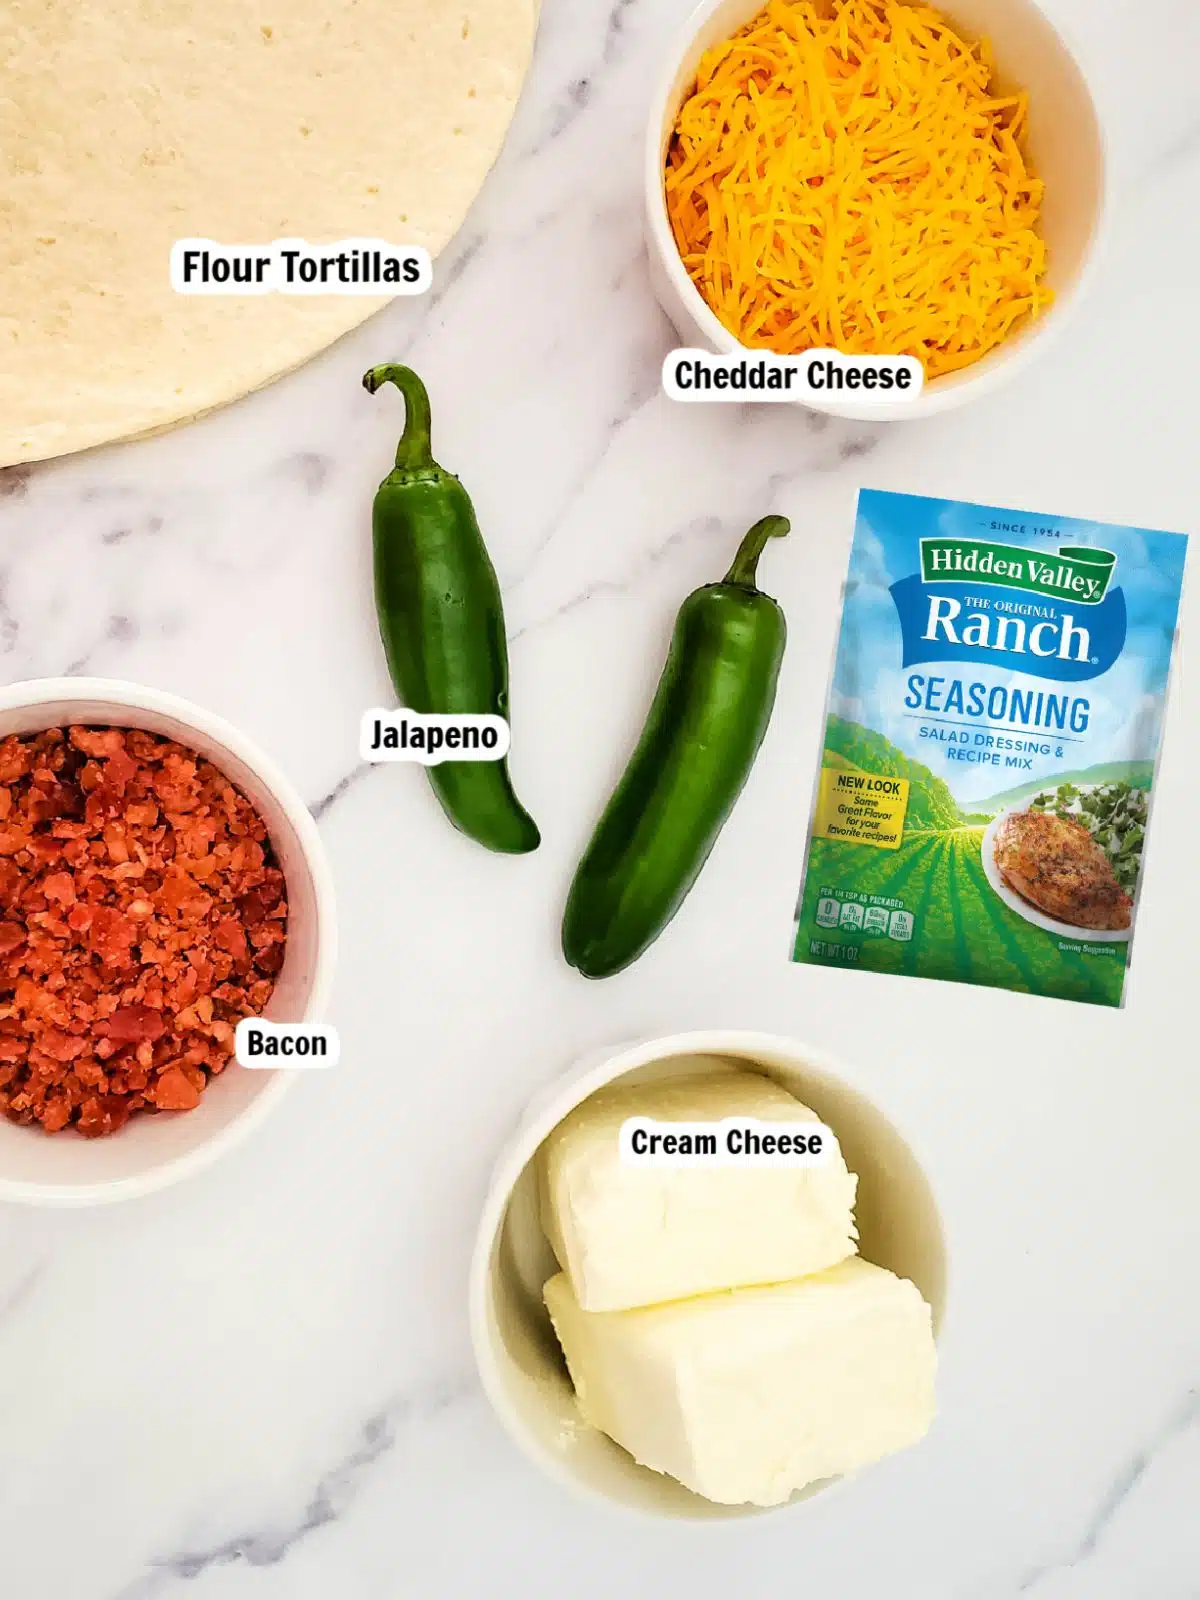 ingredients for cream cheese tortilla rollups with Hidden Valley Ranch Dressing.